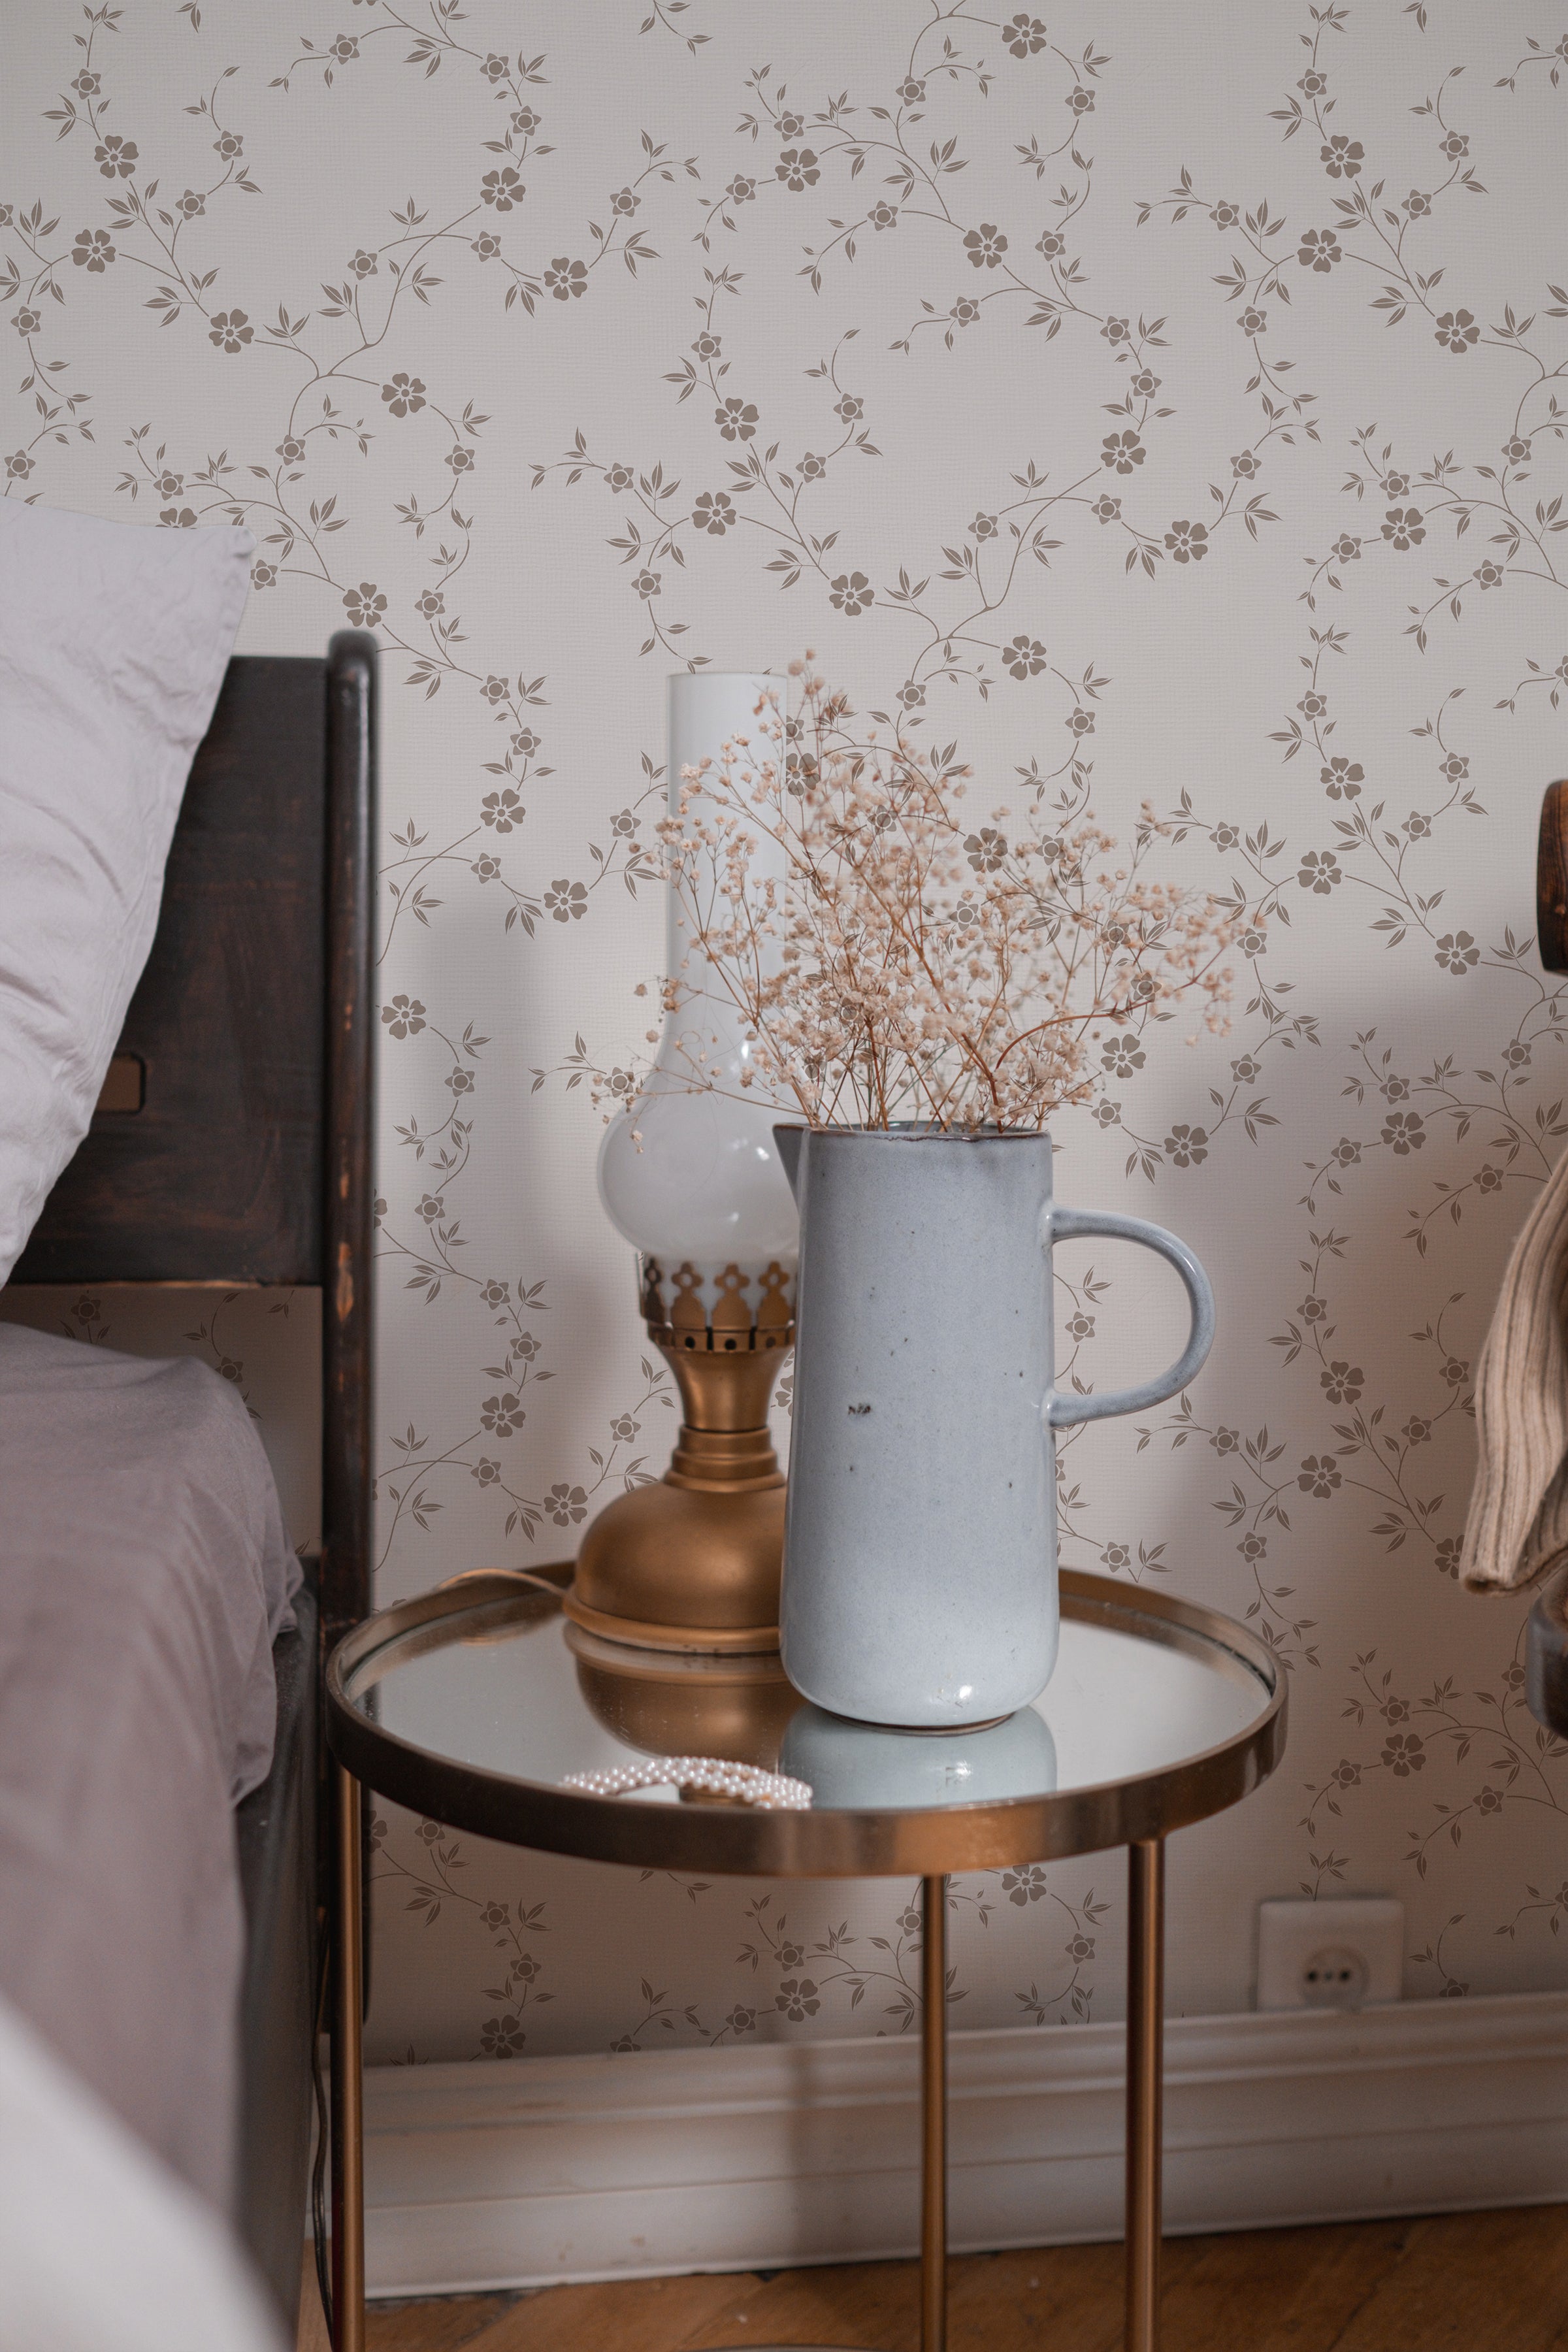 A cozy bedside with 'Charming Floral Wallpaper' providing a tranquil backdrop. The wallpaper's beige floral design exudes a peaceful atmosphere, paired with a nightstand that holds a blue vase and a brass lamp.